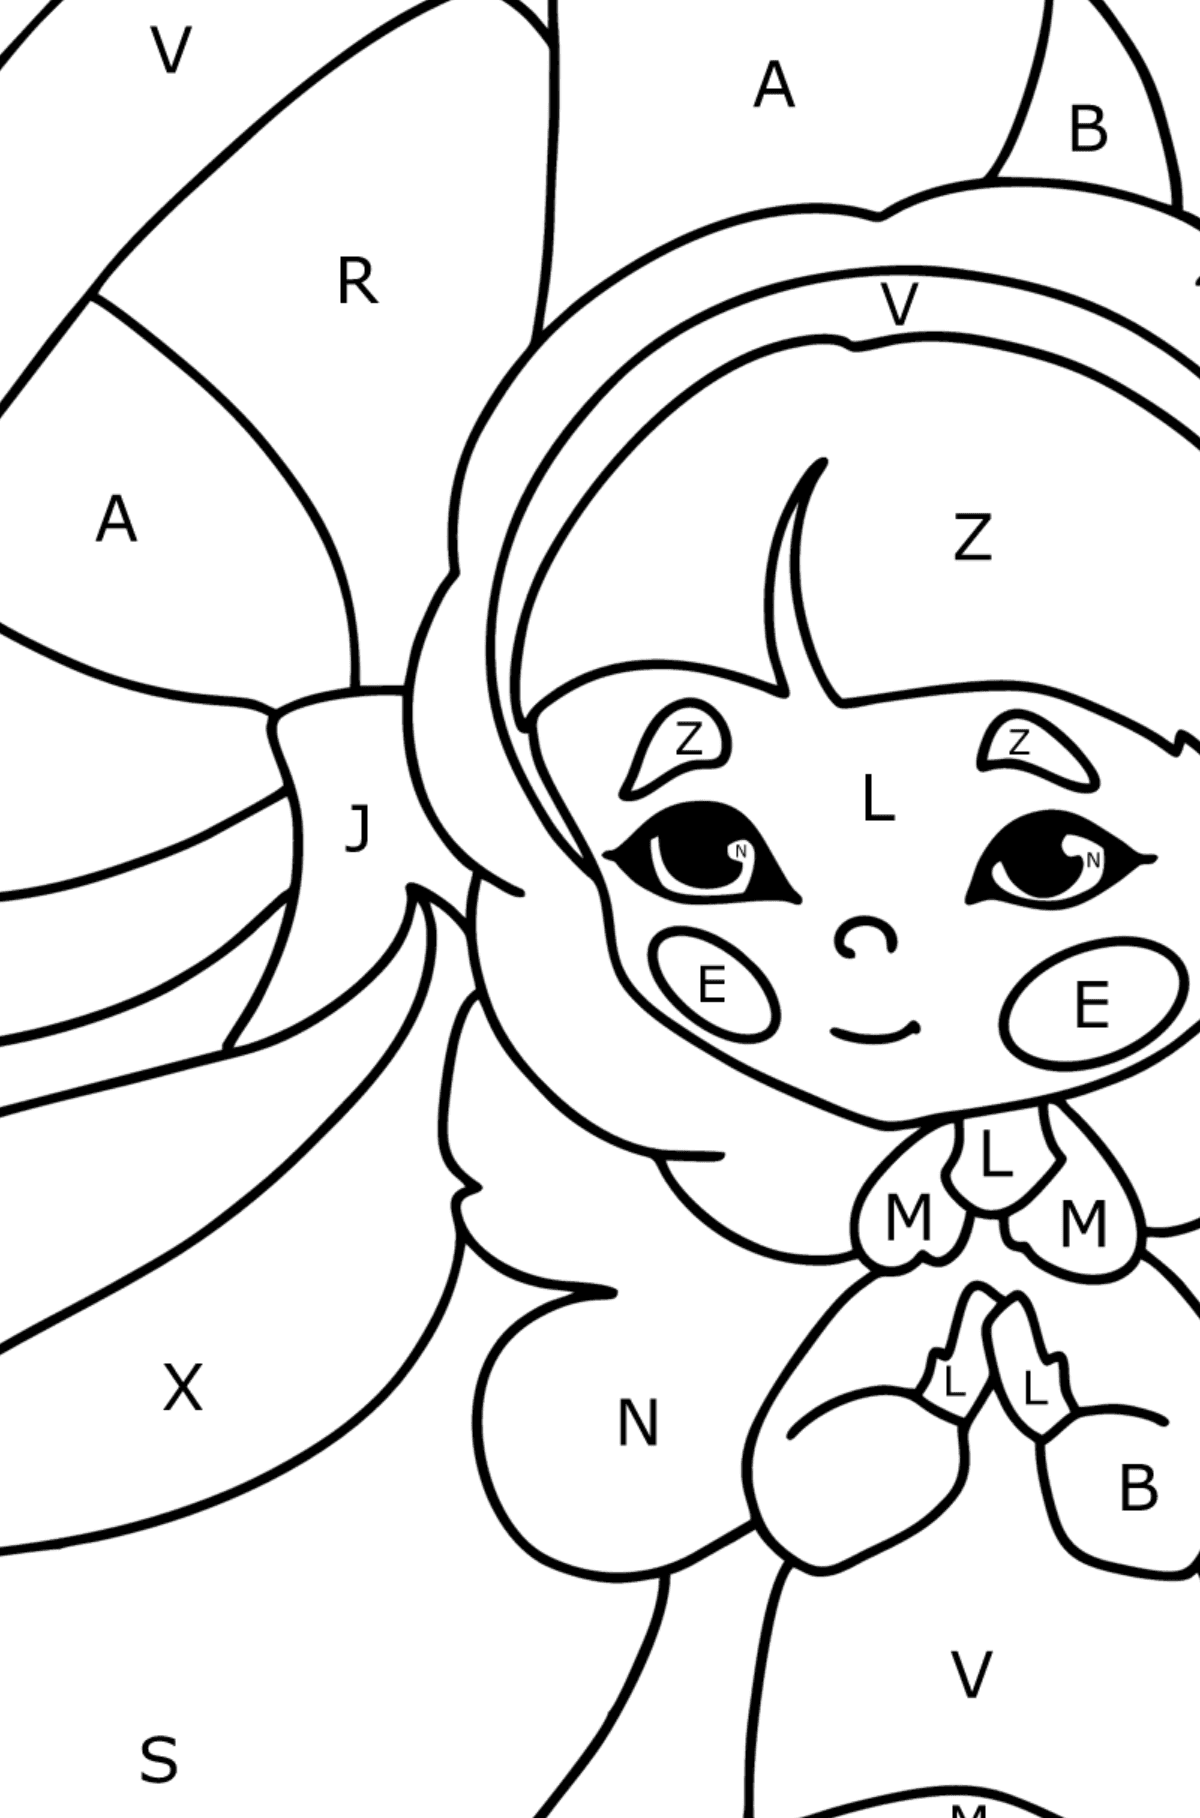 fairy and mushroom coloring page - Coloring by Letters for Kids